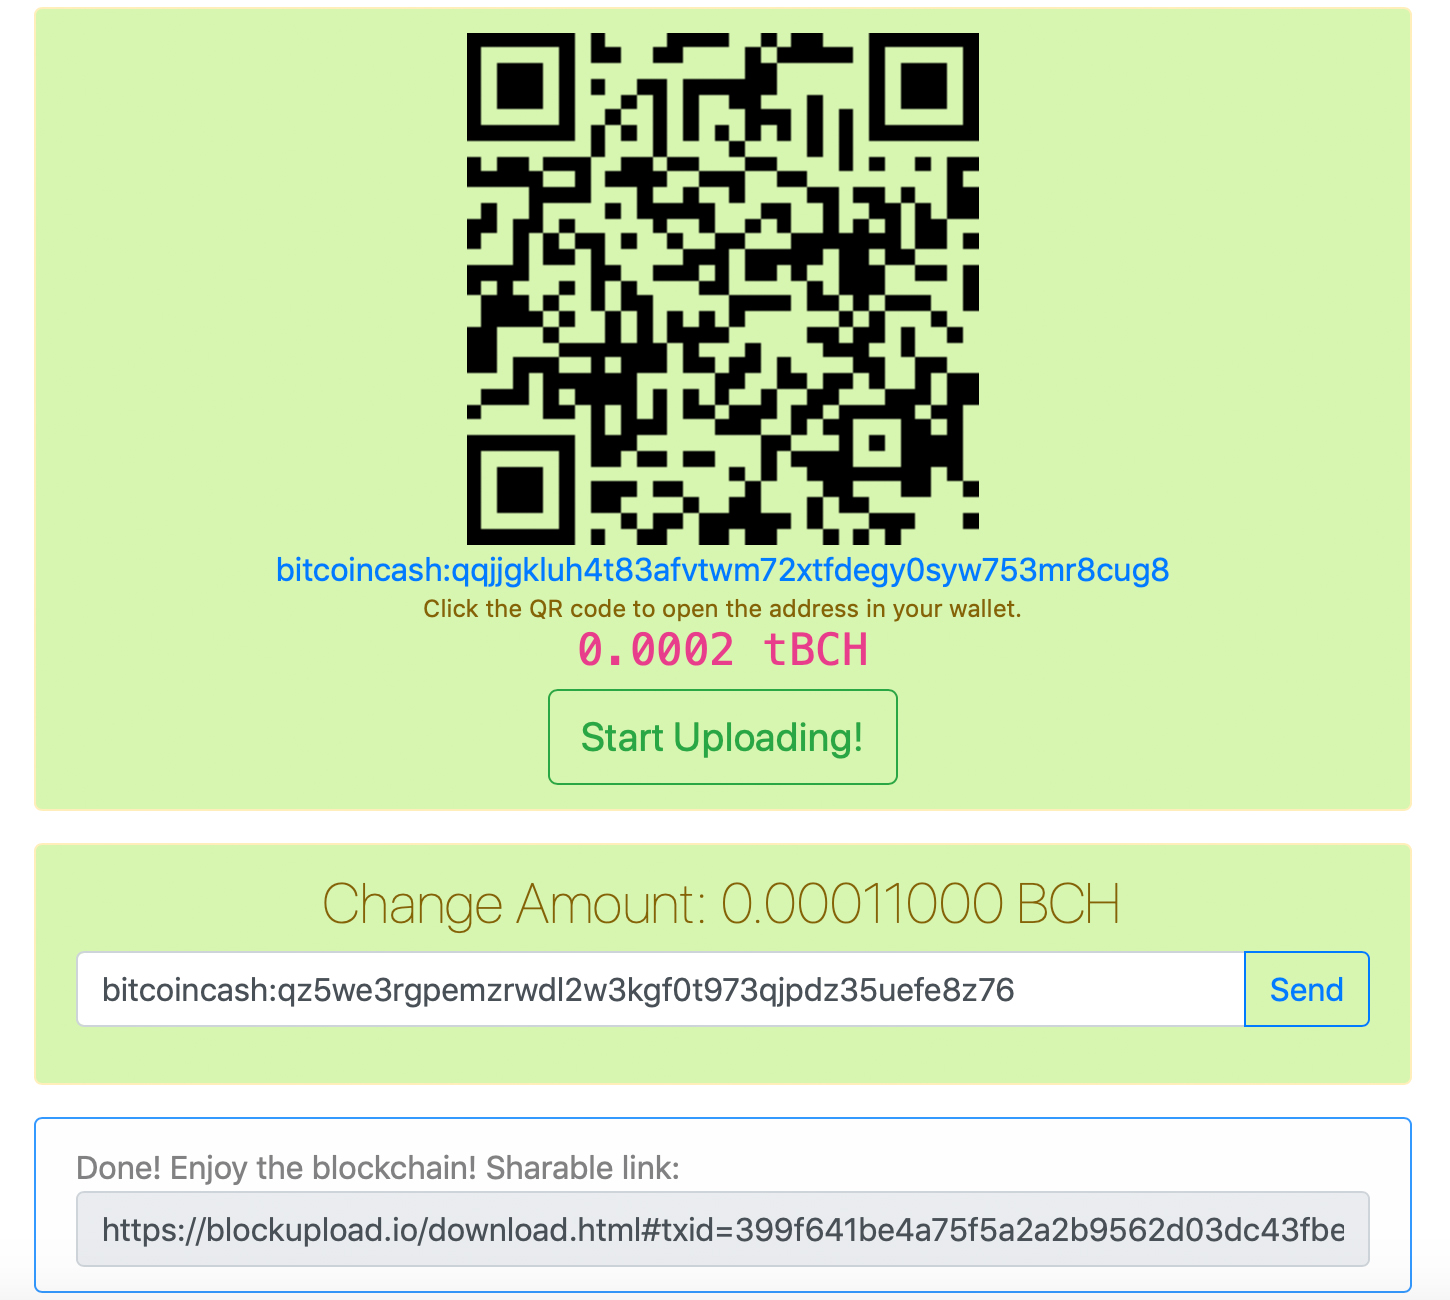 Embed 1MB Files on the Bitcoin Cash Chain With the Blockupload Platform